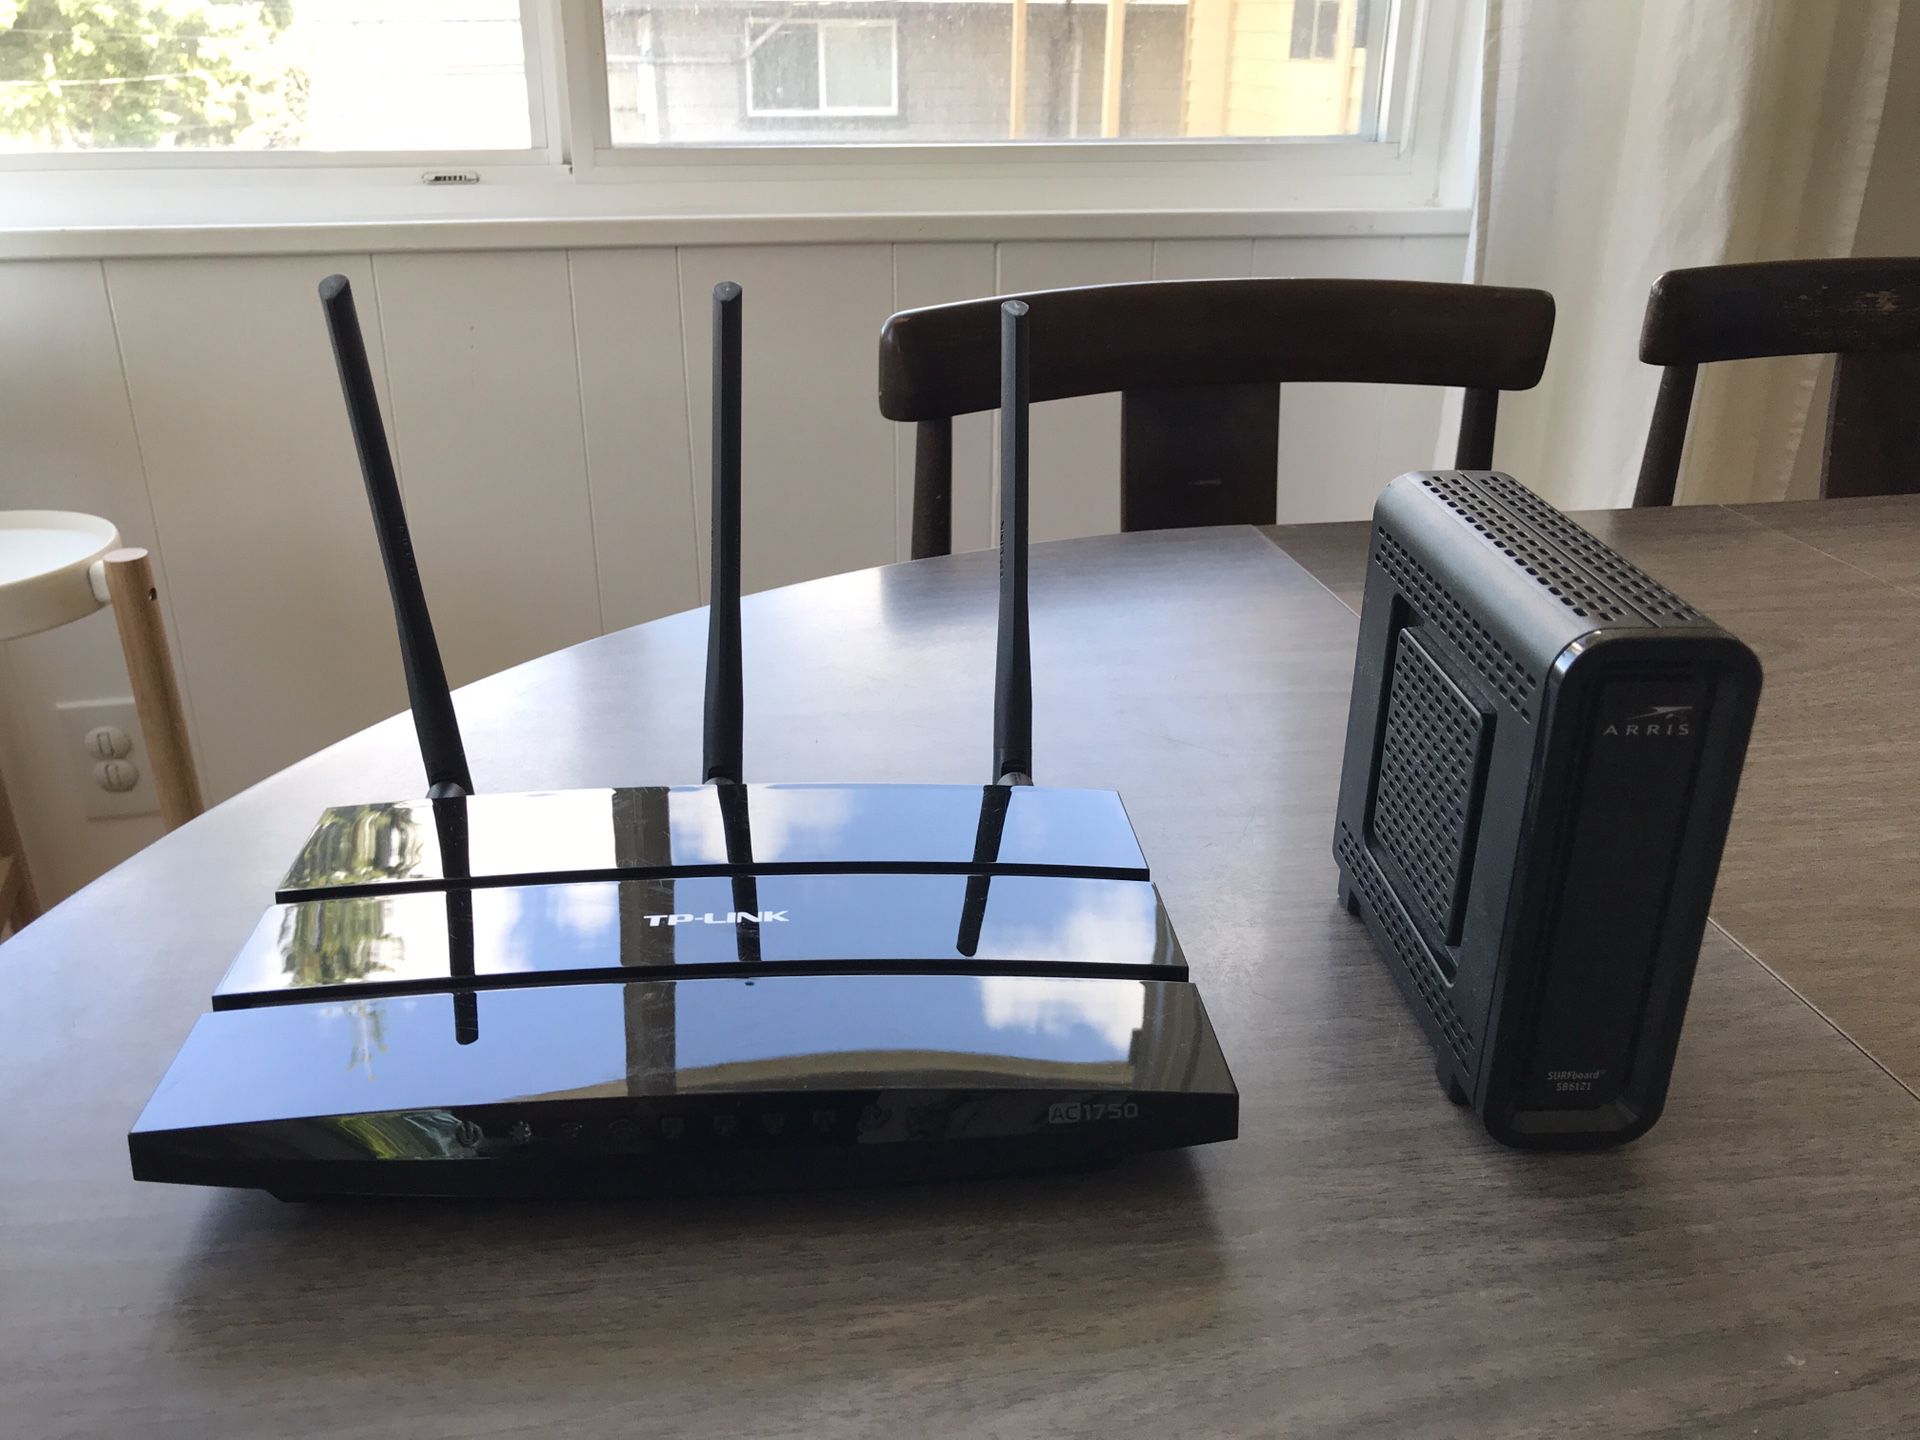 TP-link WiFi router and ARRIS cable modems